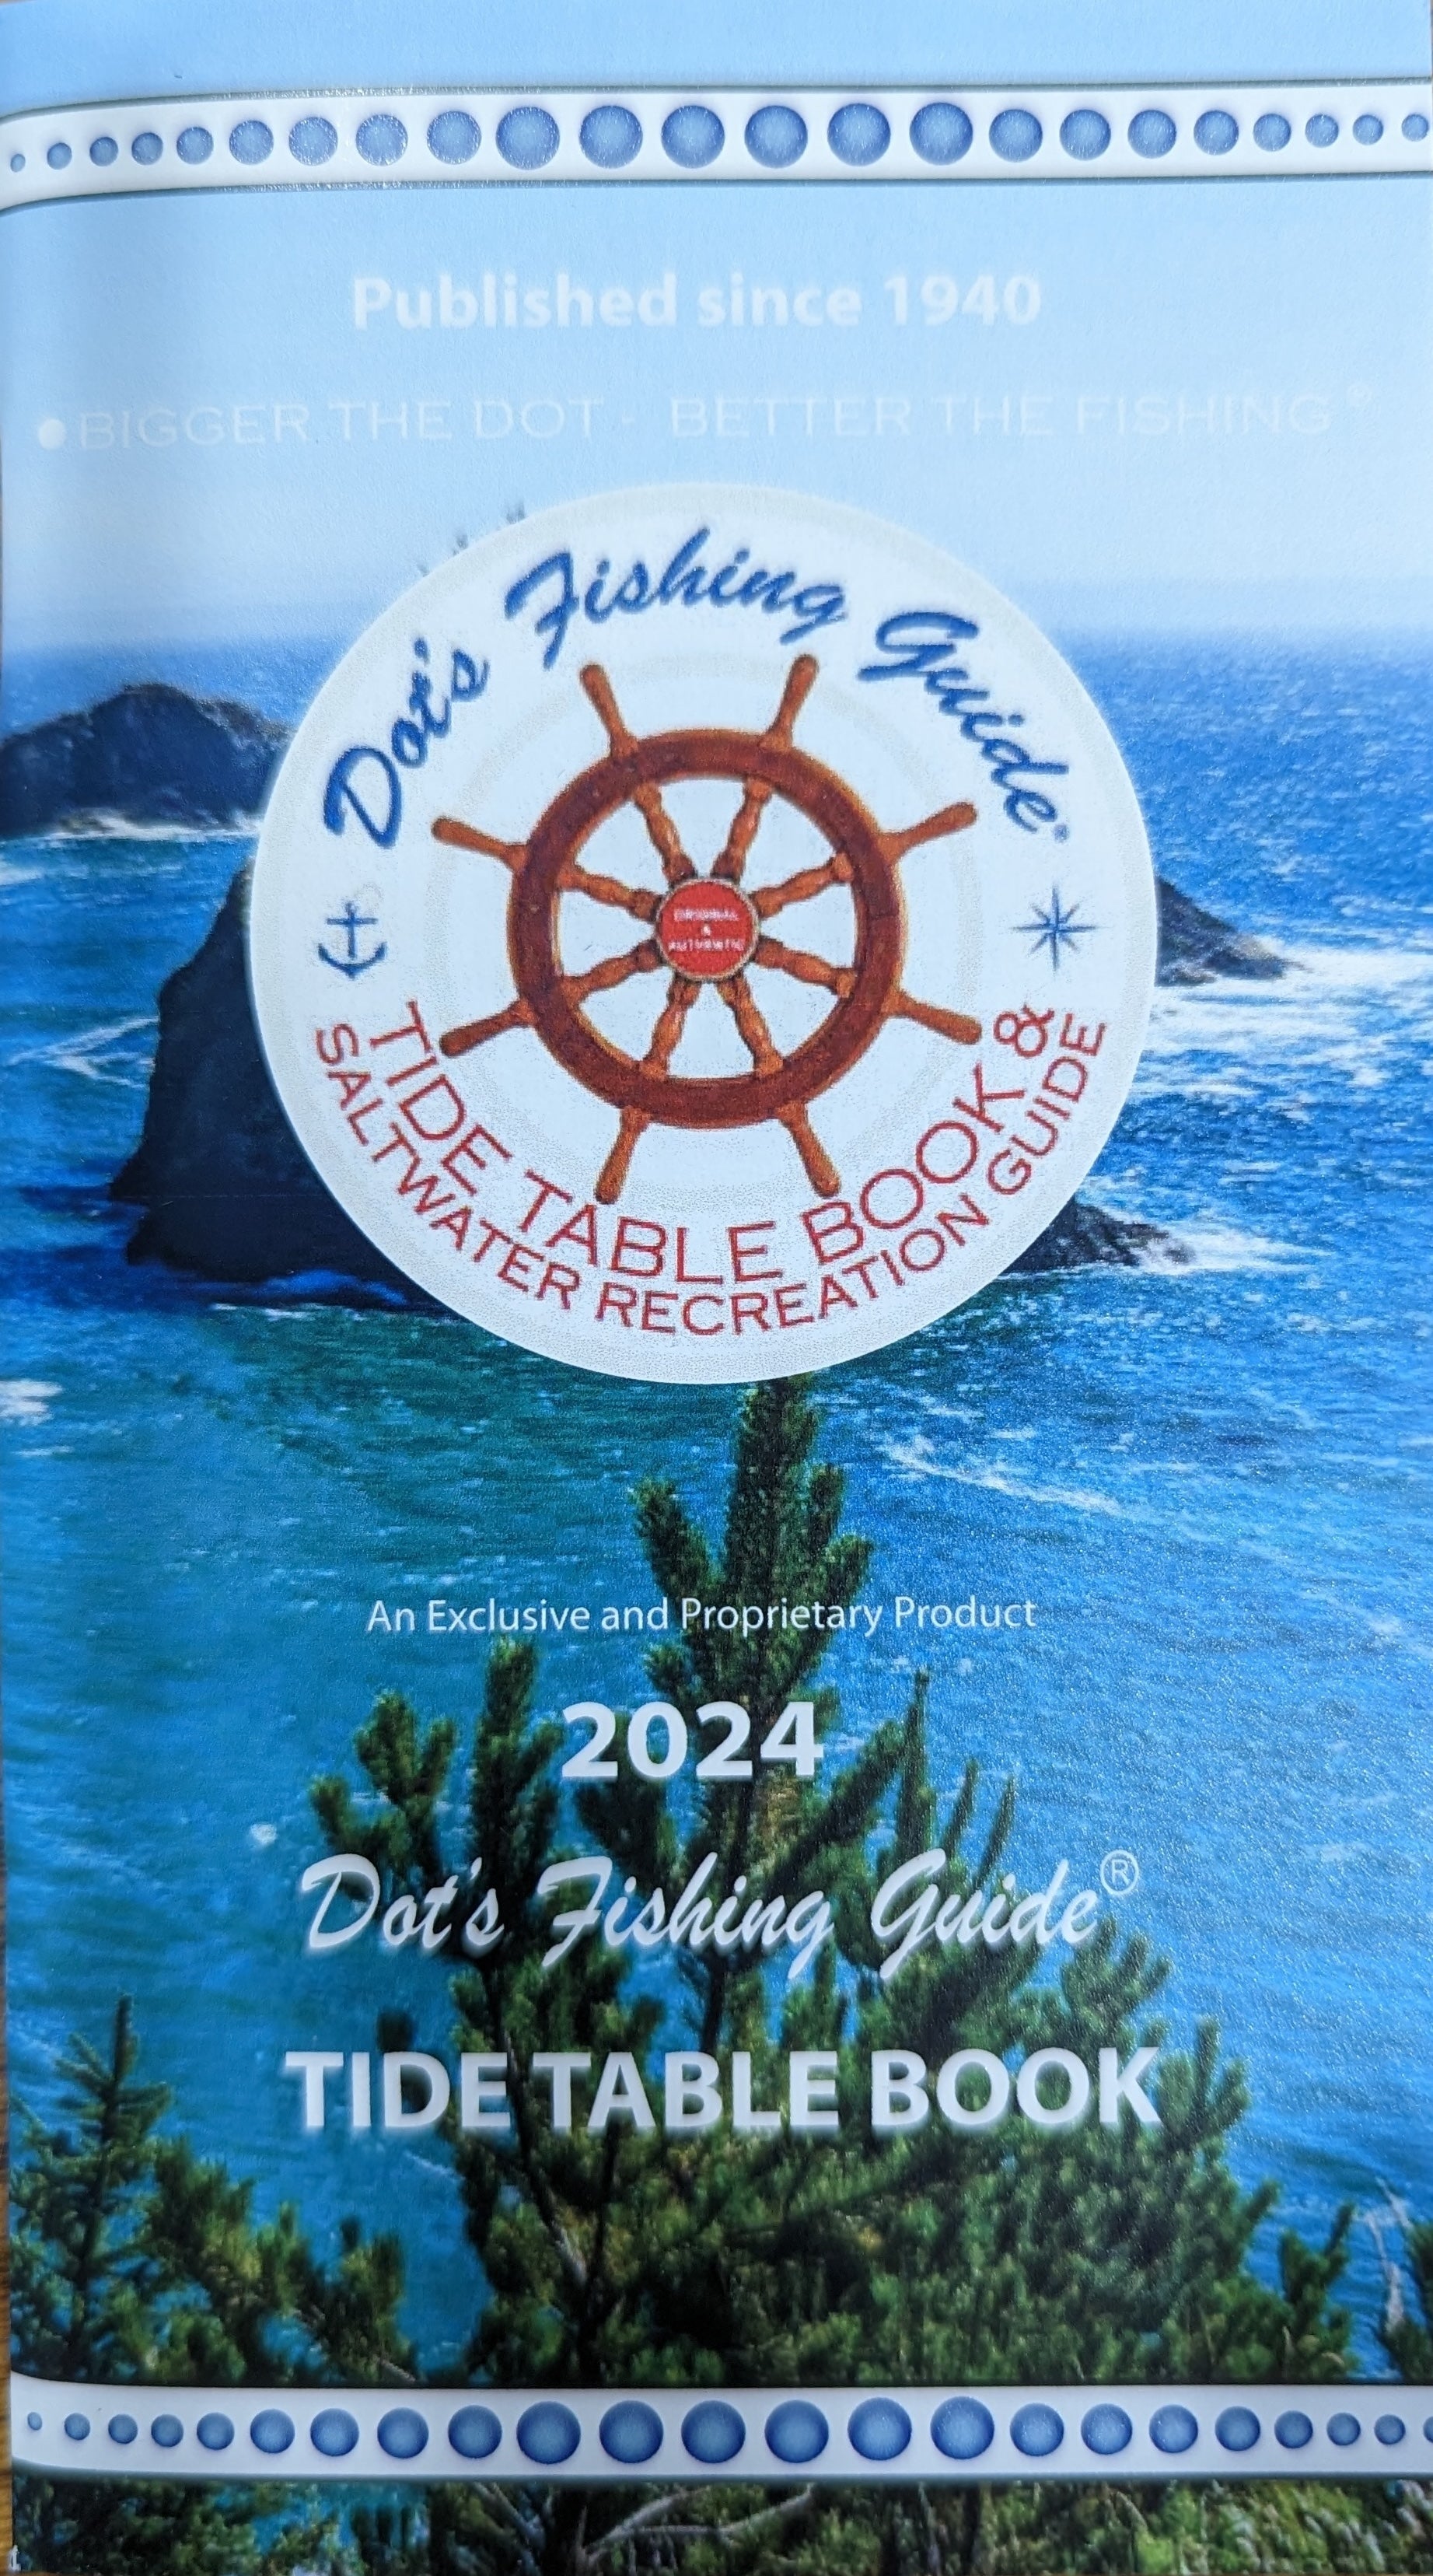 2024 Tide Tables & Dot's Fishing Guide Ketchikan District ProStar